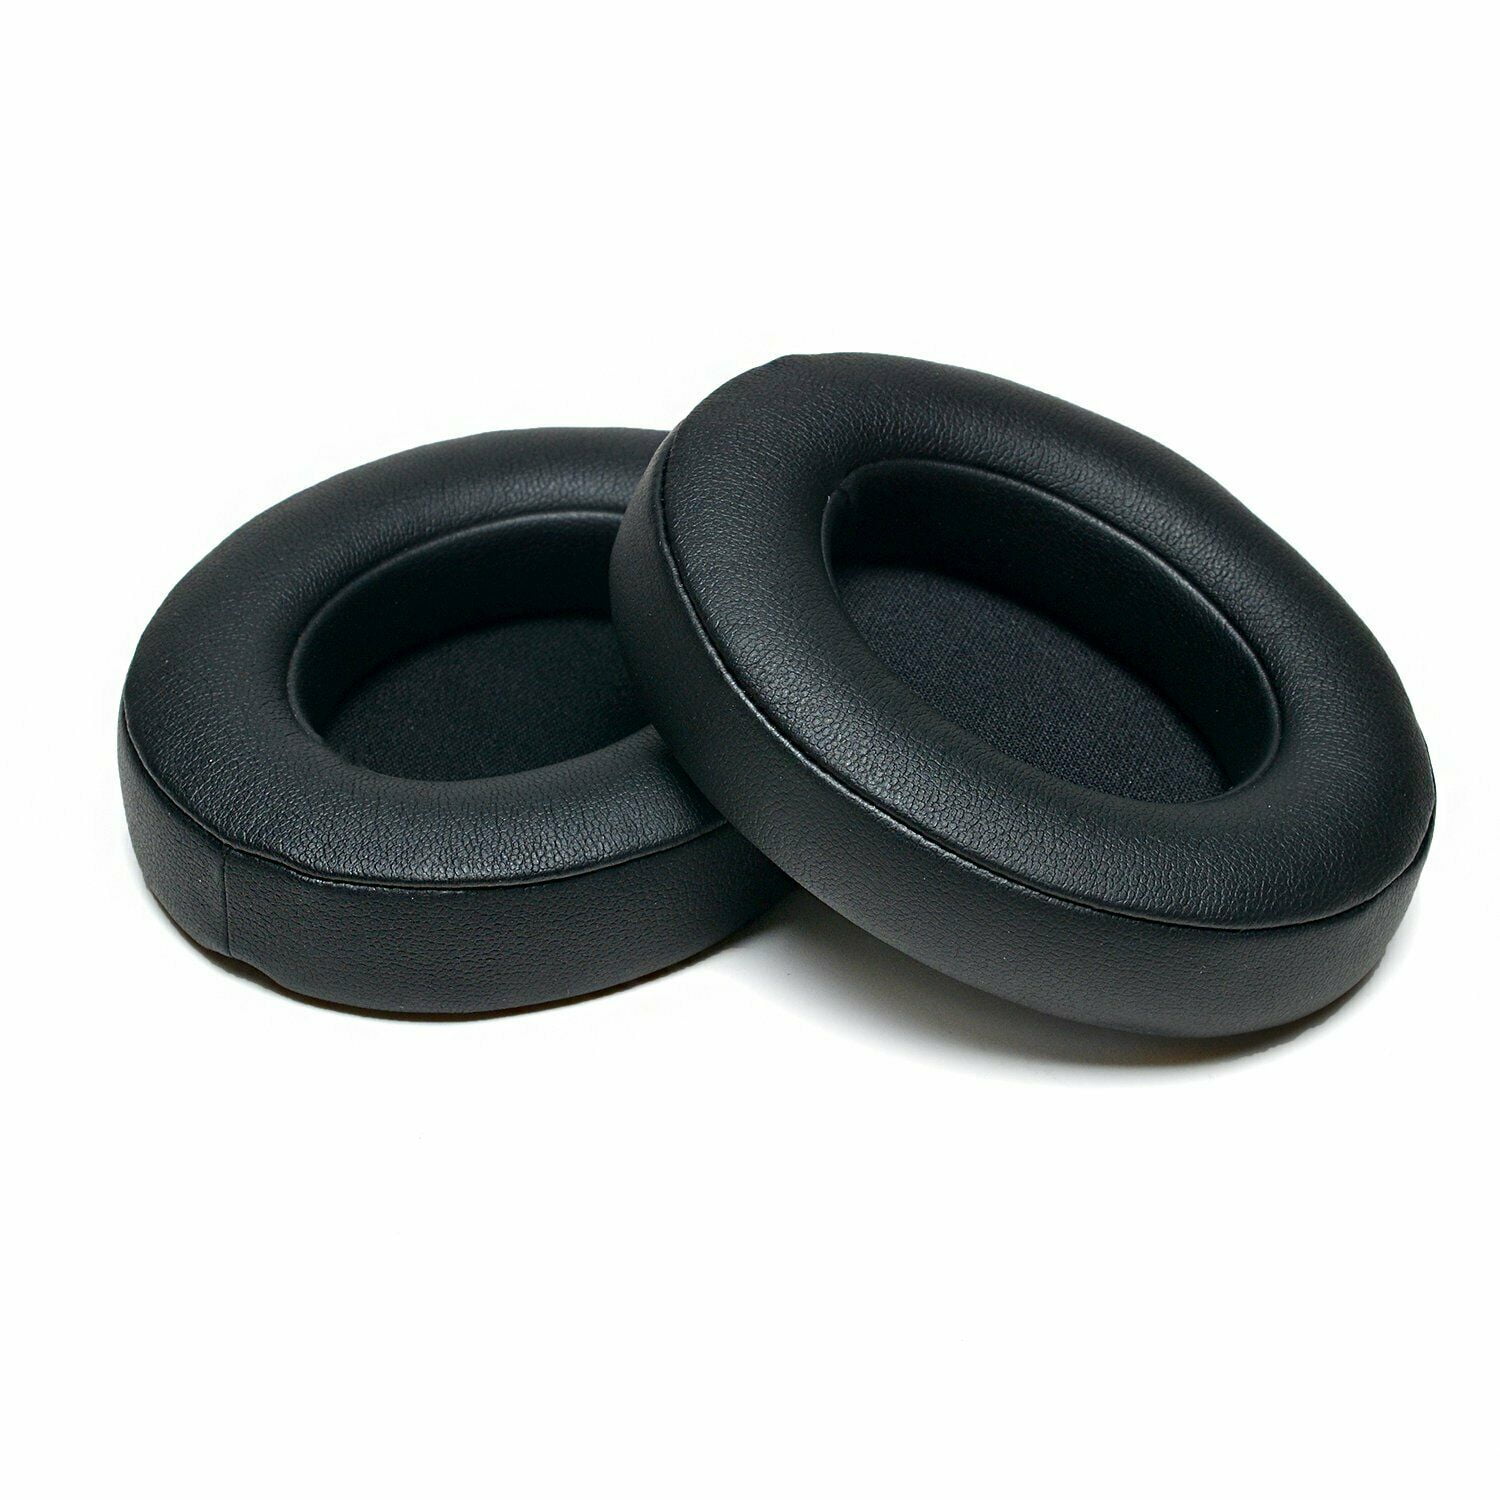 Replacement Ear Pads for Beats Studio/Compatible with 2 Wired B0500 / Wireless / Studio 2 and Studio 3 A1914 /Soft Protein Leather/ Noise Memory Foam (Black) - Walmart.com